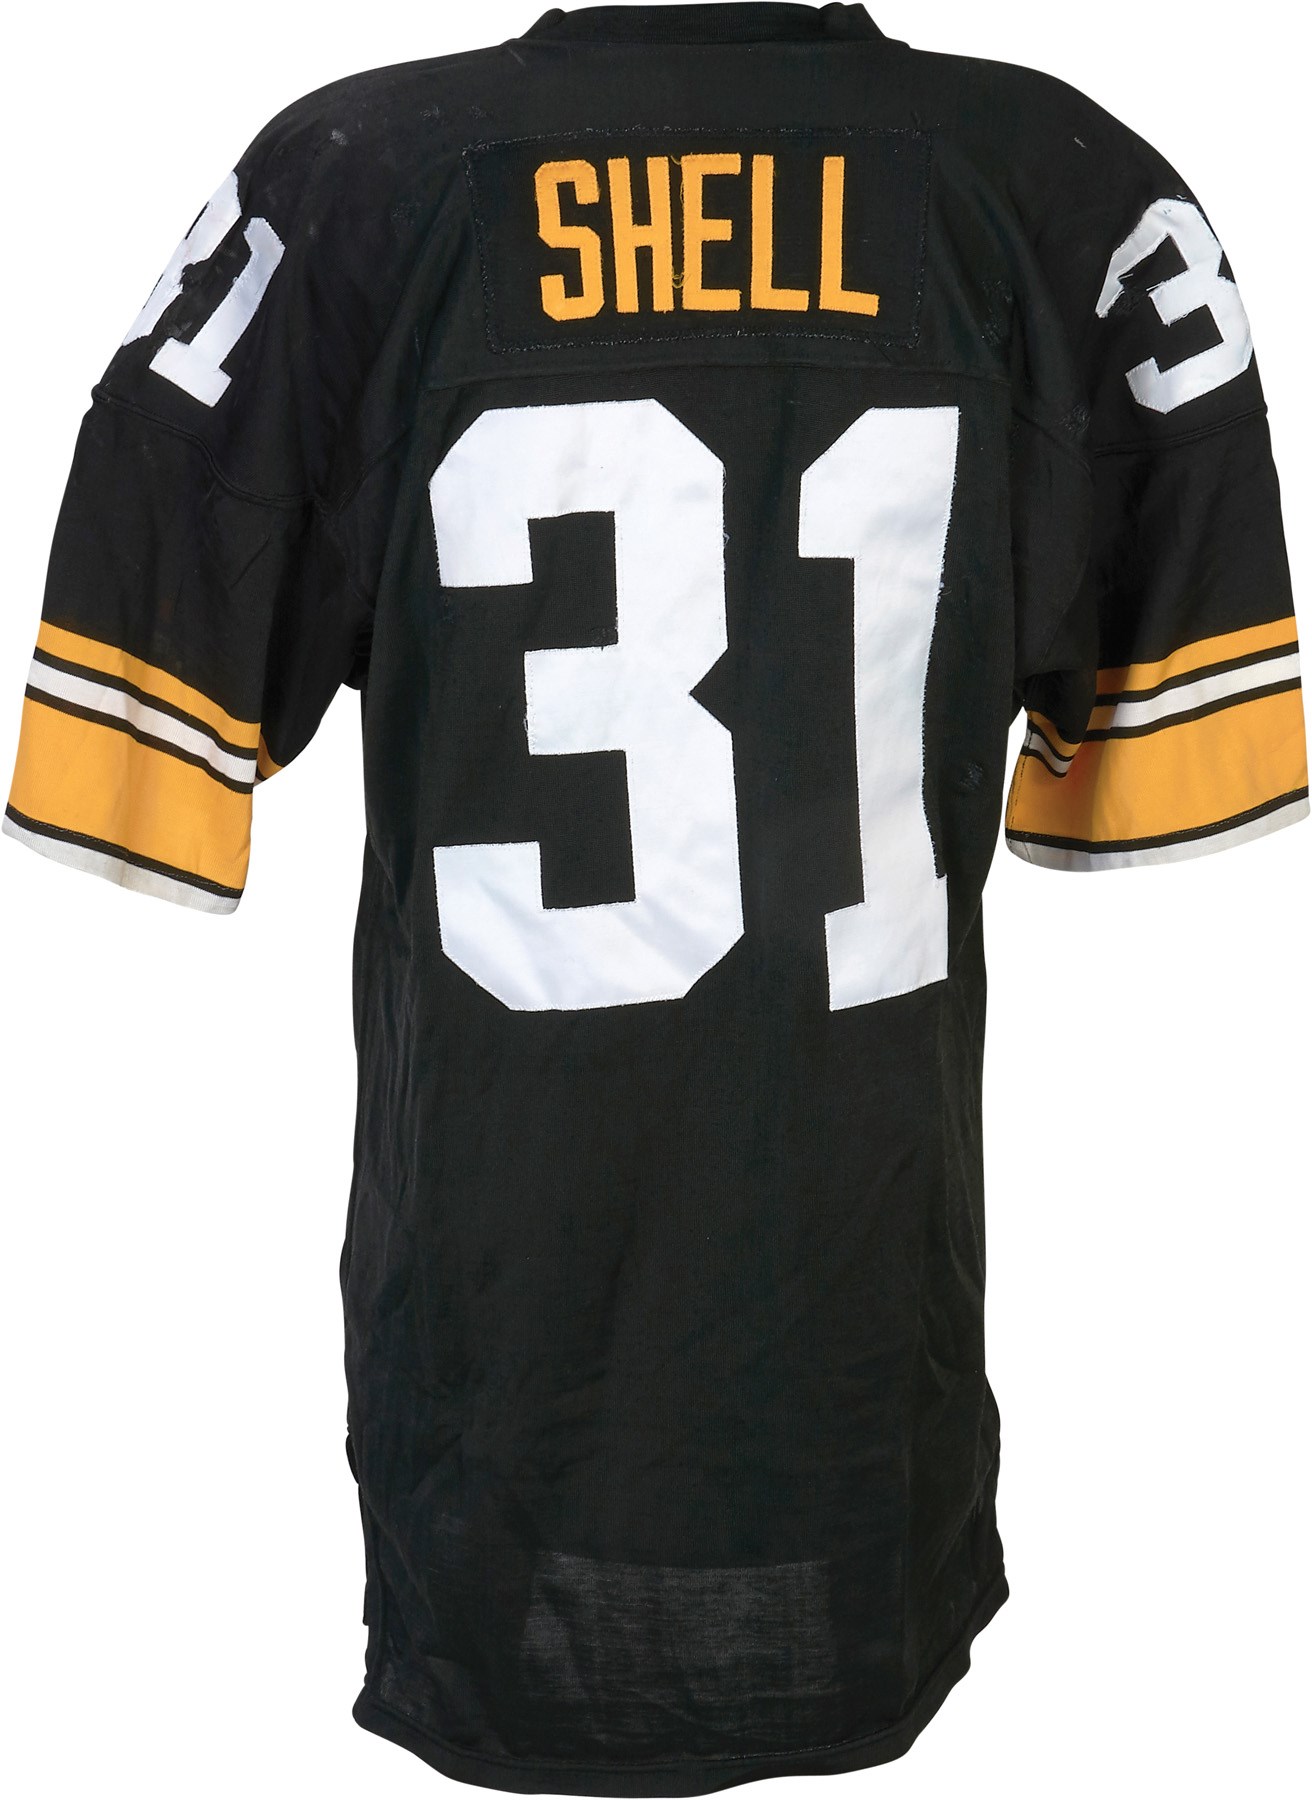 The Pittsburgh Steelers Game Worn Jersey Archive - 1985 Donnie Shell Pittsburgh Steelers Game Worn Jersey (Photo-Matched)